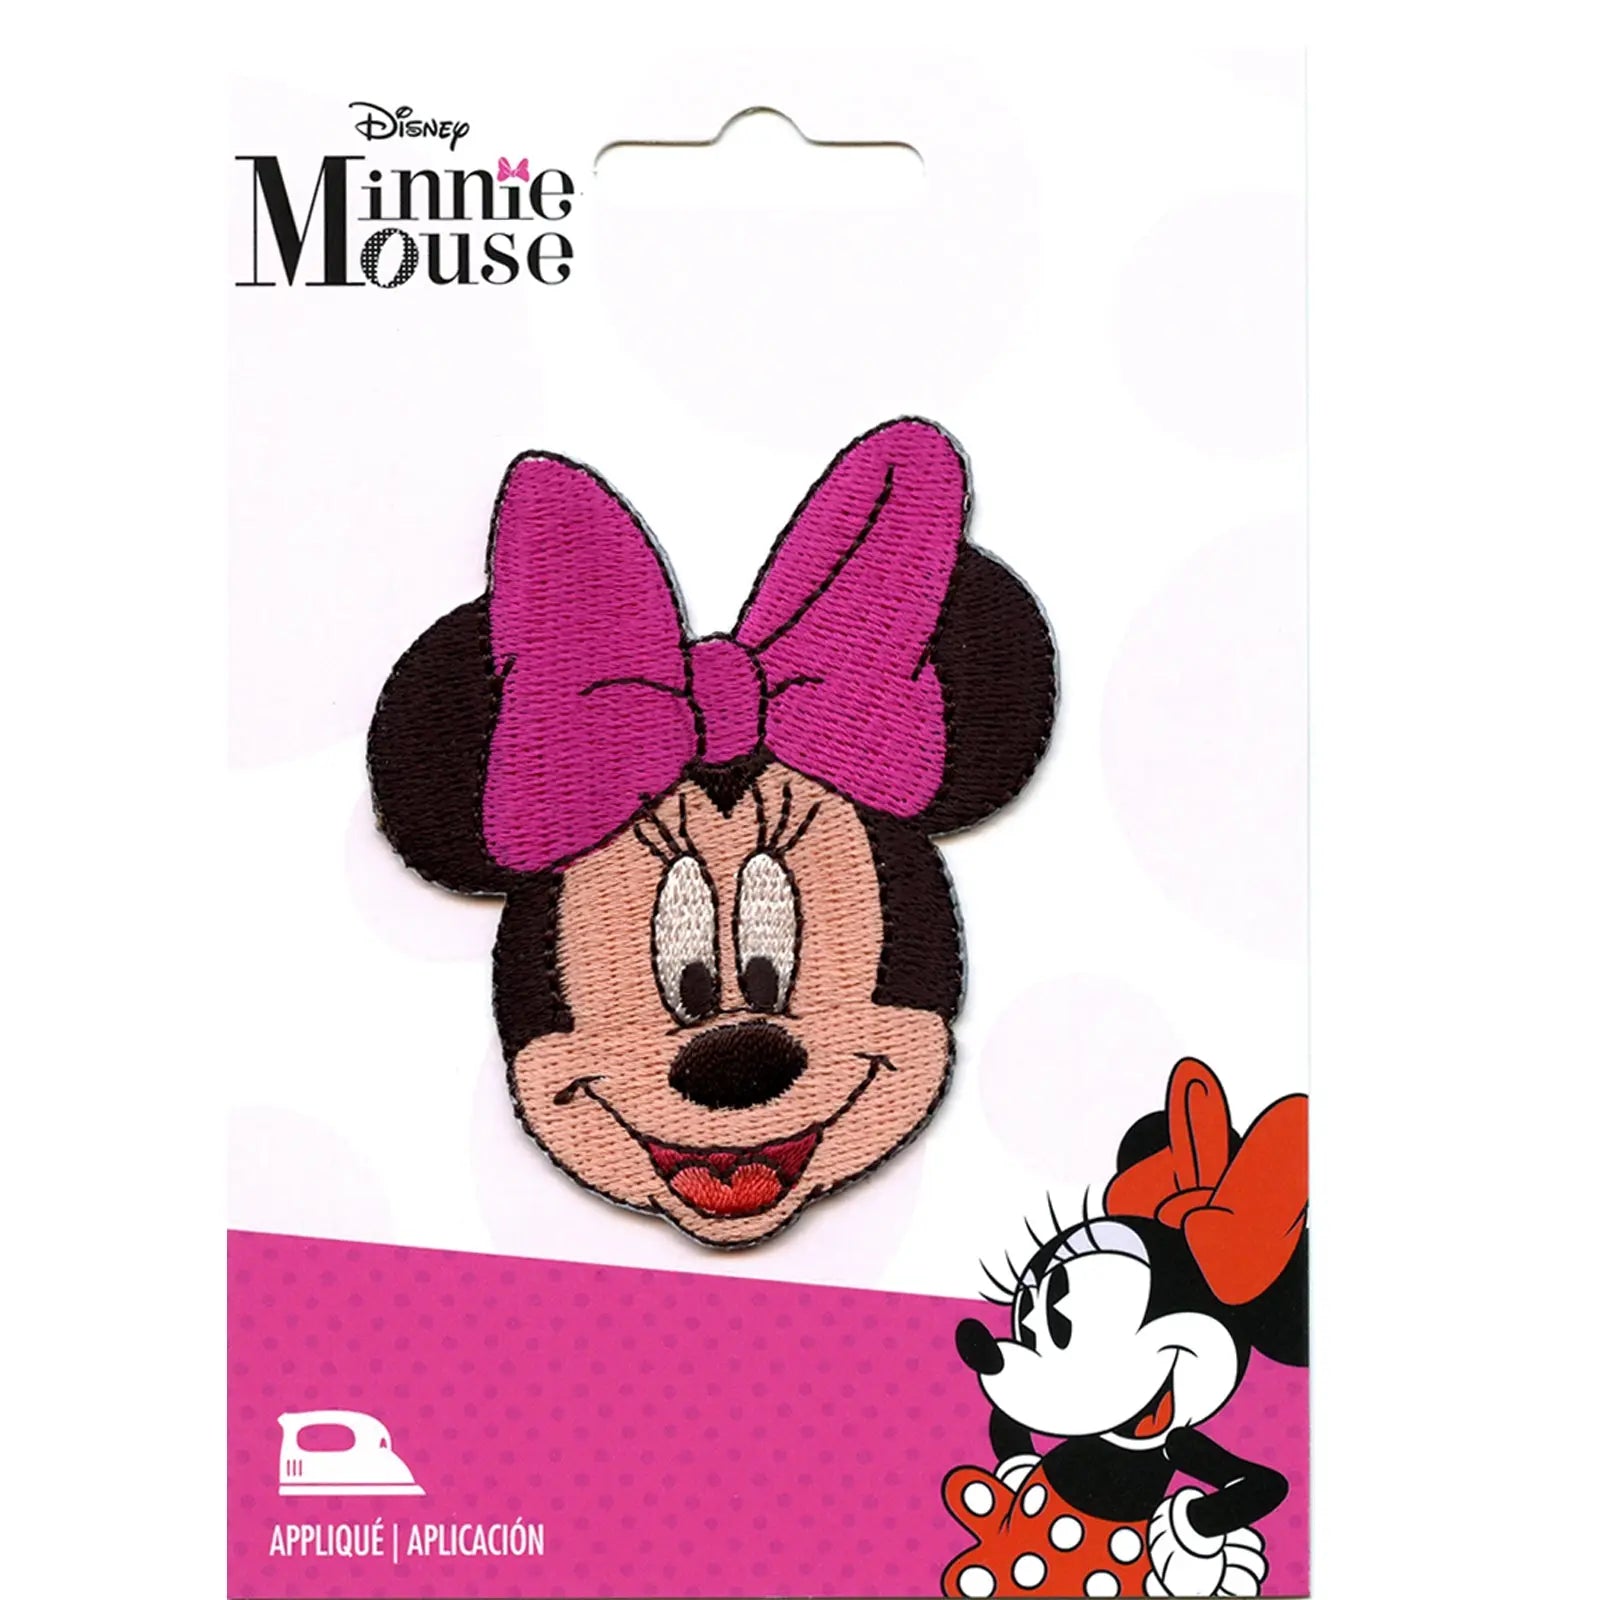 Disney © Minnie Mouse Oval - Iron On Patches Adhesive Emblem Stickers  Appliques, Size: 3.46 x 2.36 Inches